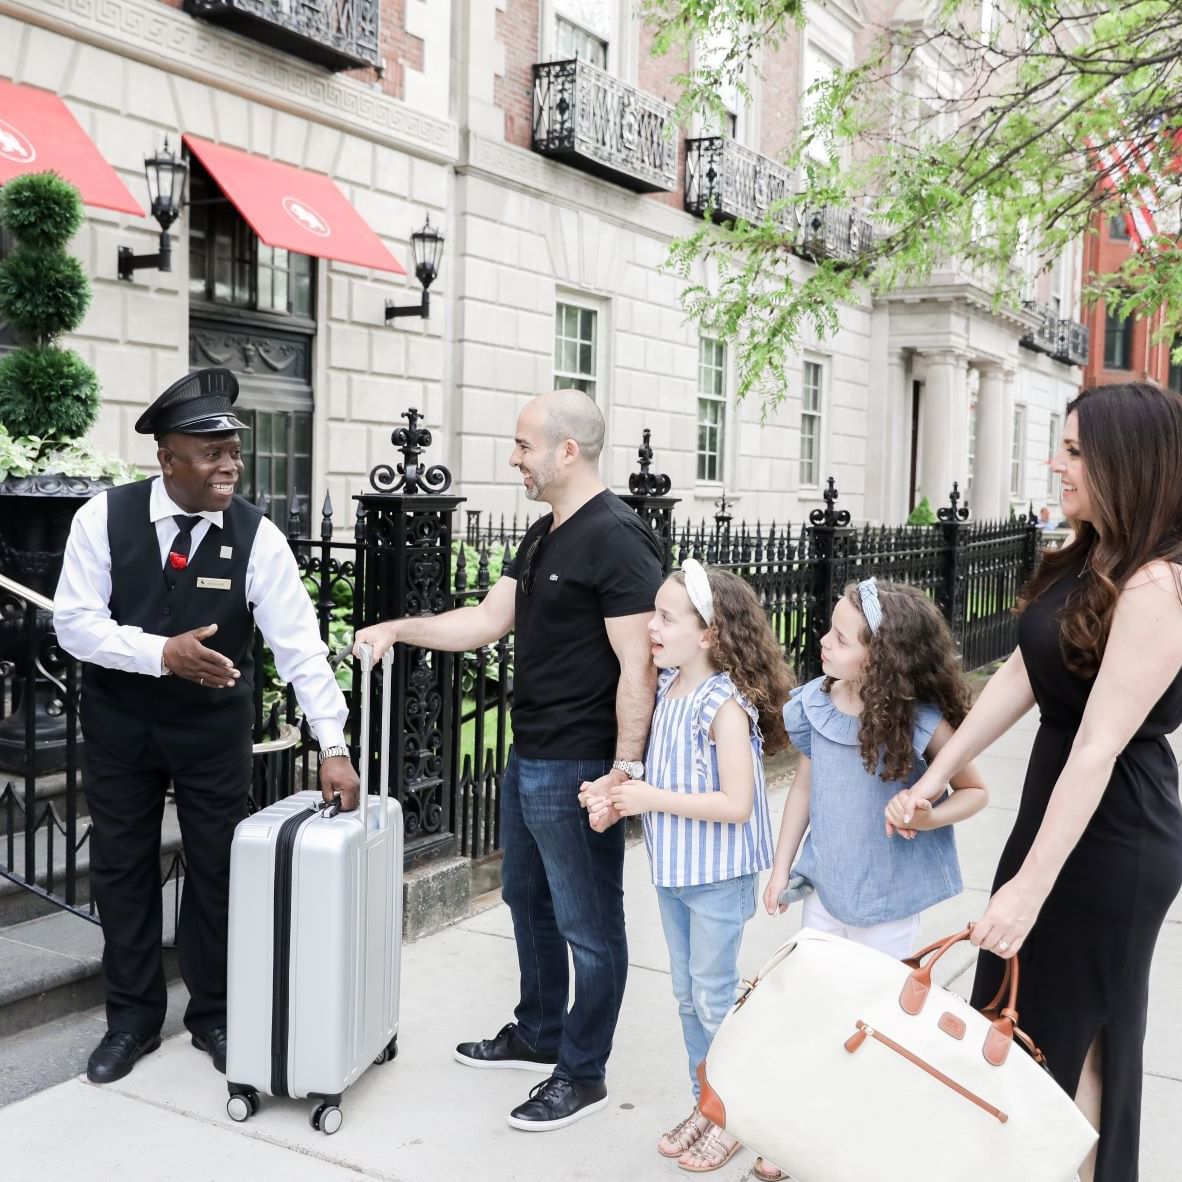 A bellman greeting a family of four in front of the hotel.